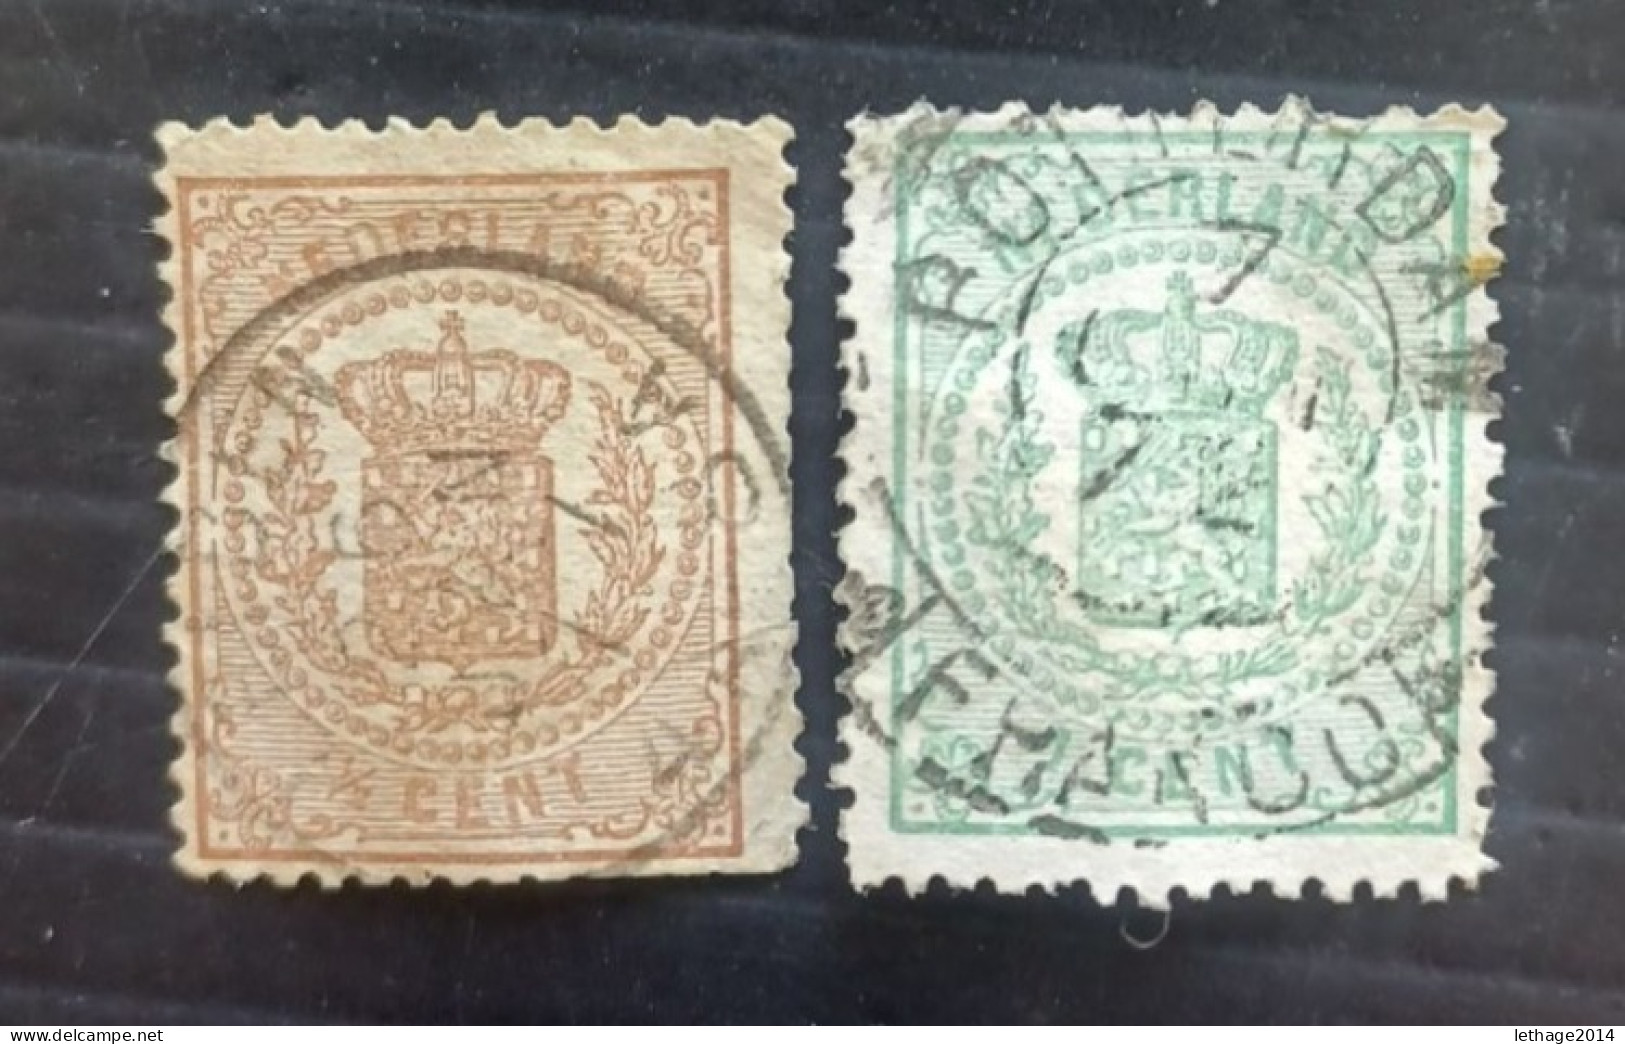 NEDERLAND PAESI BASSI OLANDA 1867 GUGLIELMO III 36 SCANNERS + MANY FRAGMANT PERFIN OBLITERE STOCK LOT MIX  --- GIULY - Collections